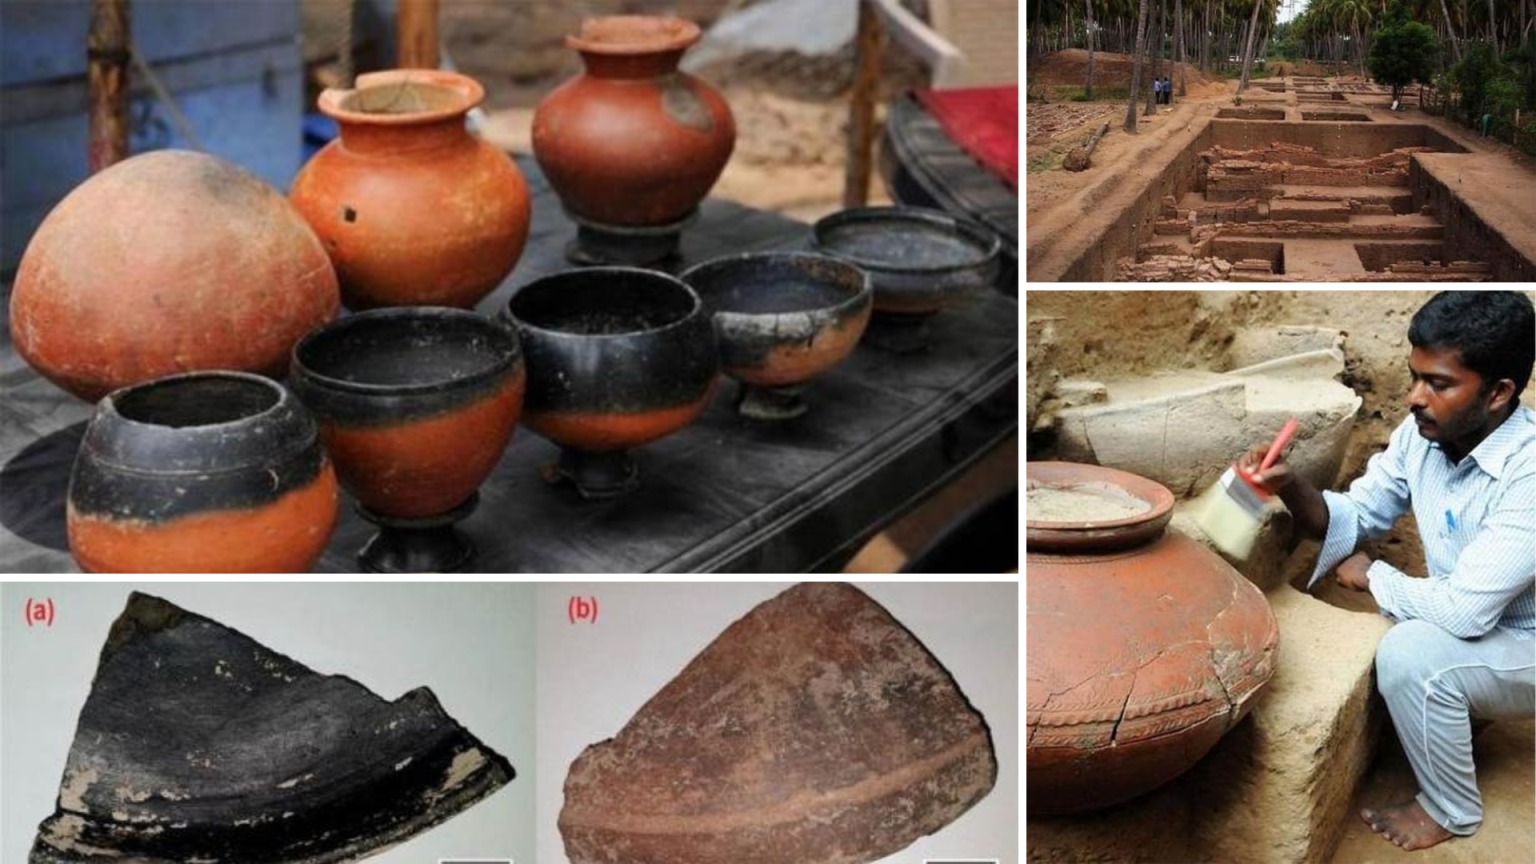 Indian Civilization Applied Advanced Nanomaterials to Their Pots 2500 Years Ago